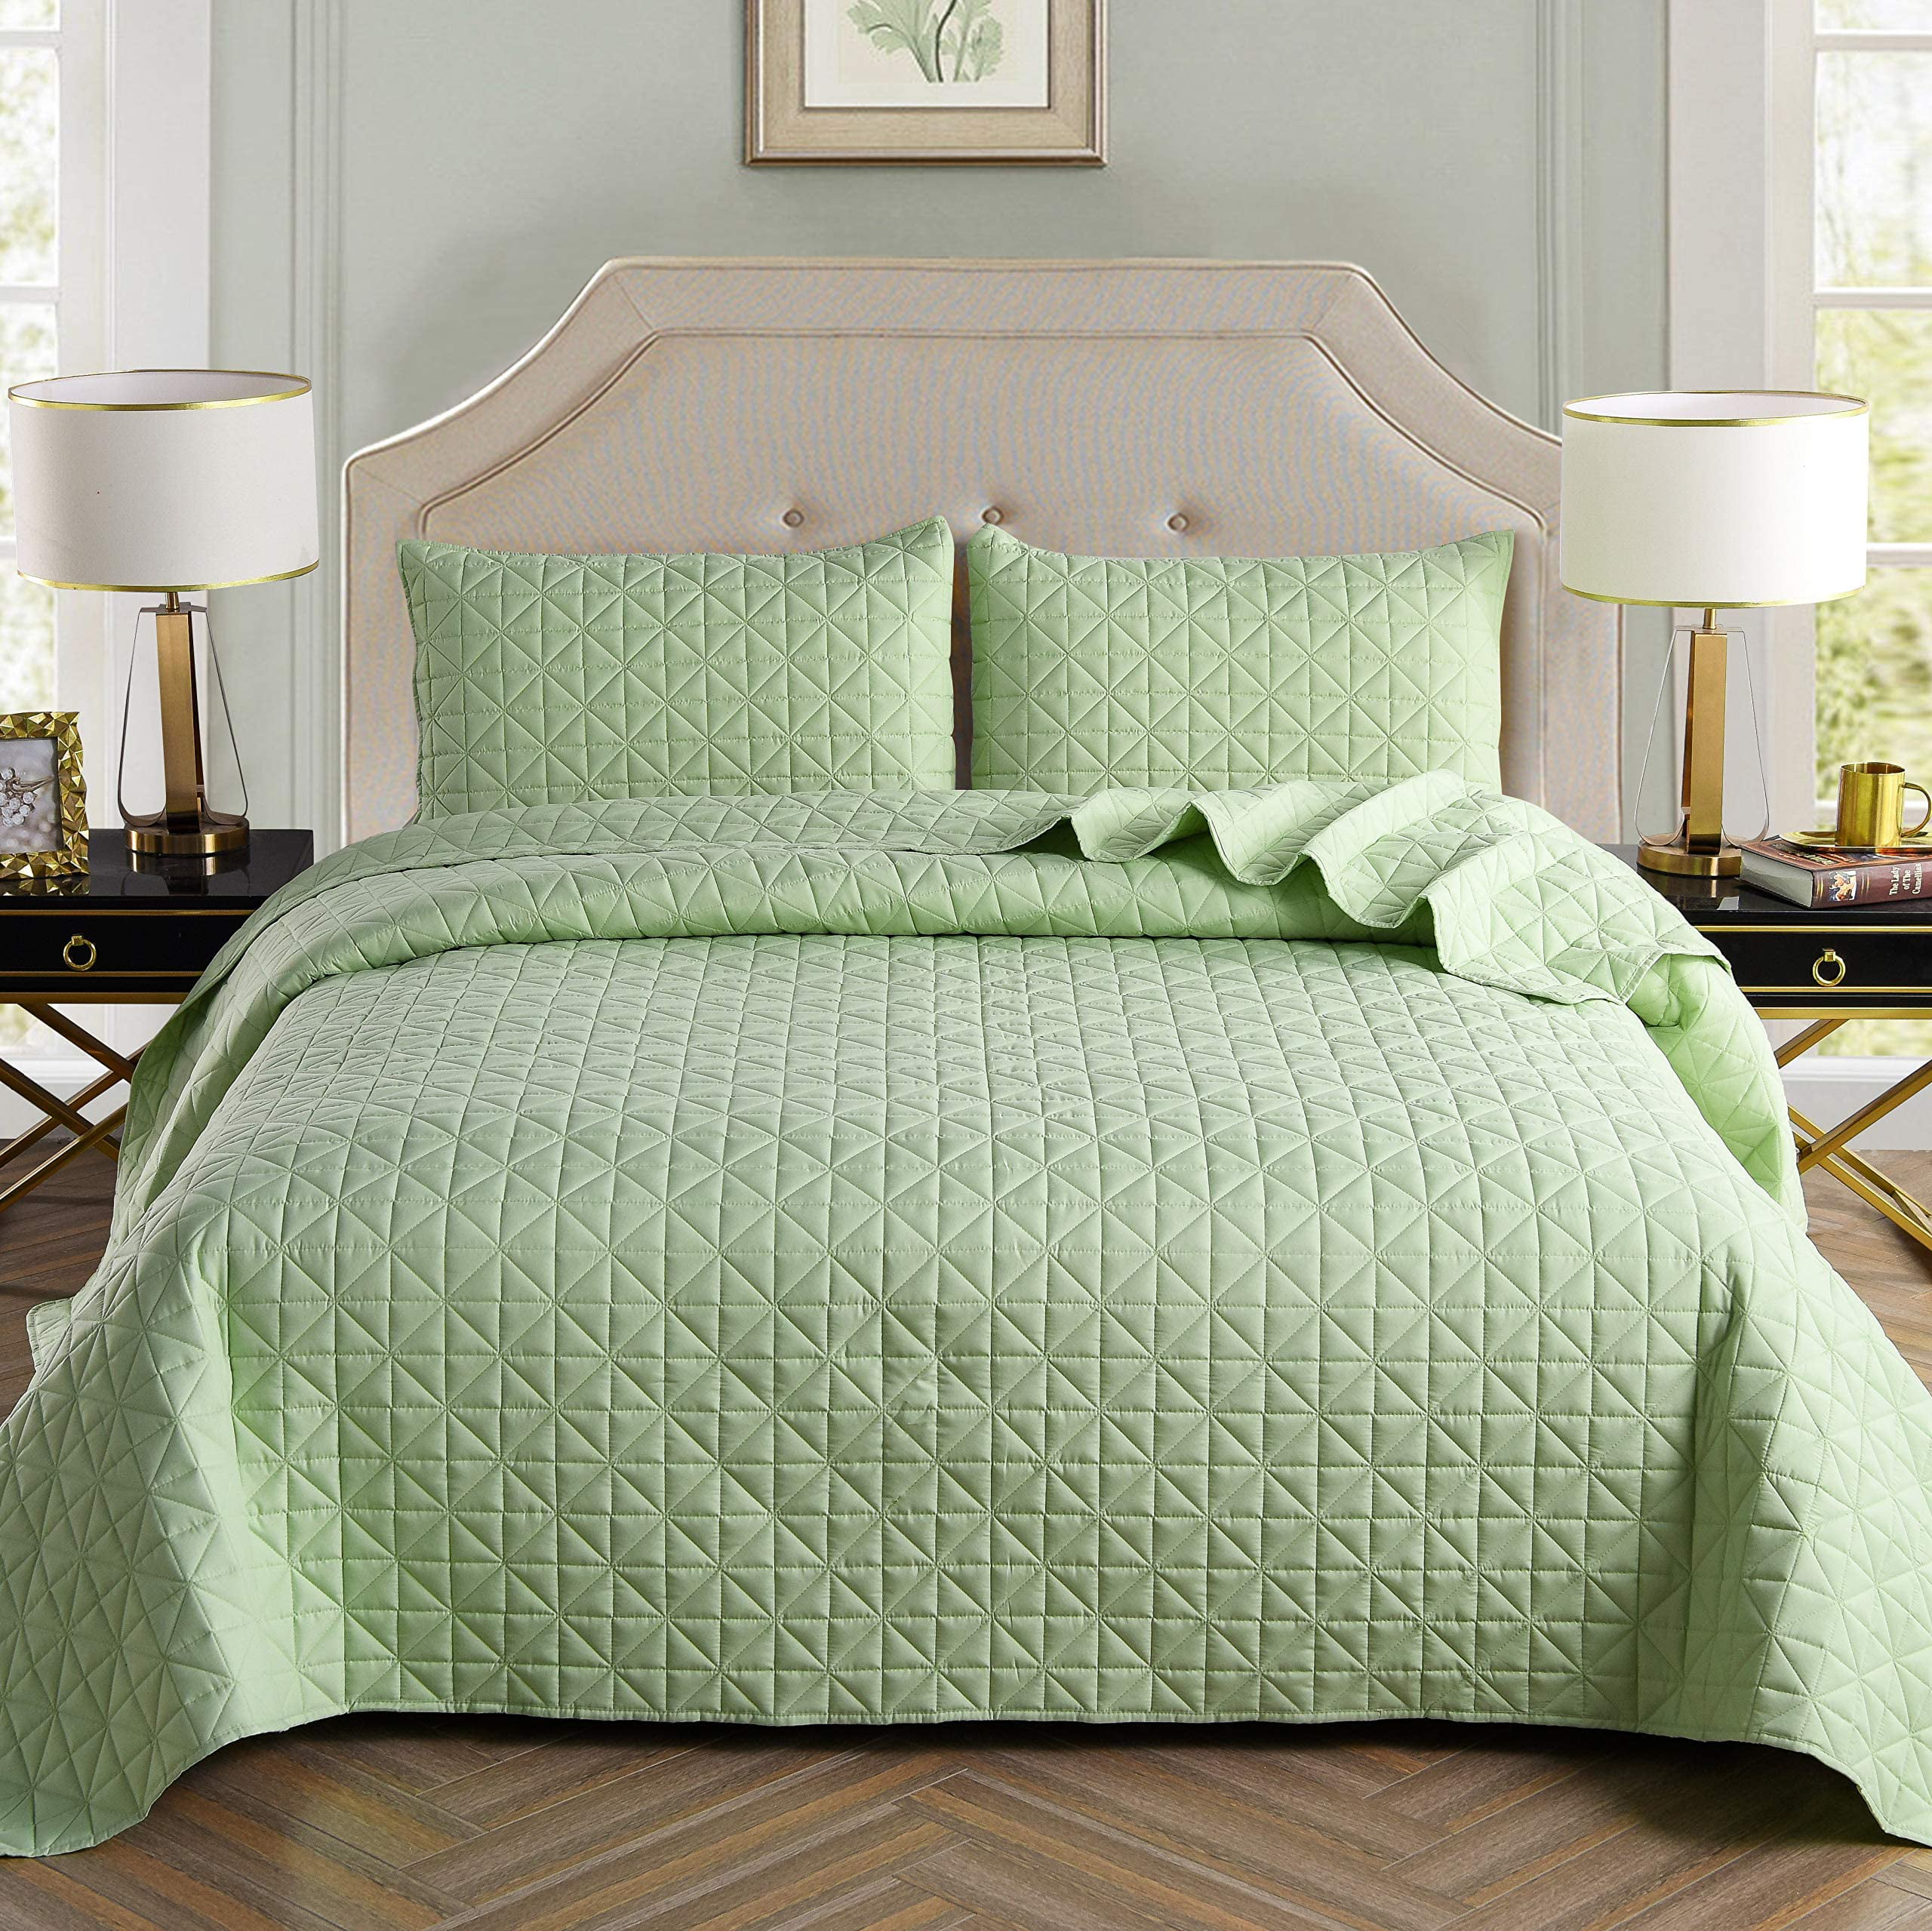 King Size Quilt Set With Pillow Shams, Seafoam Green Duvet Cover King